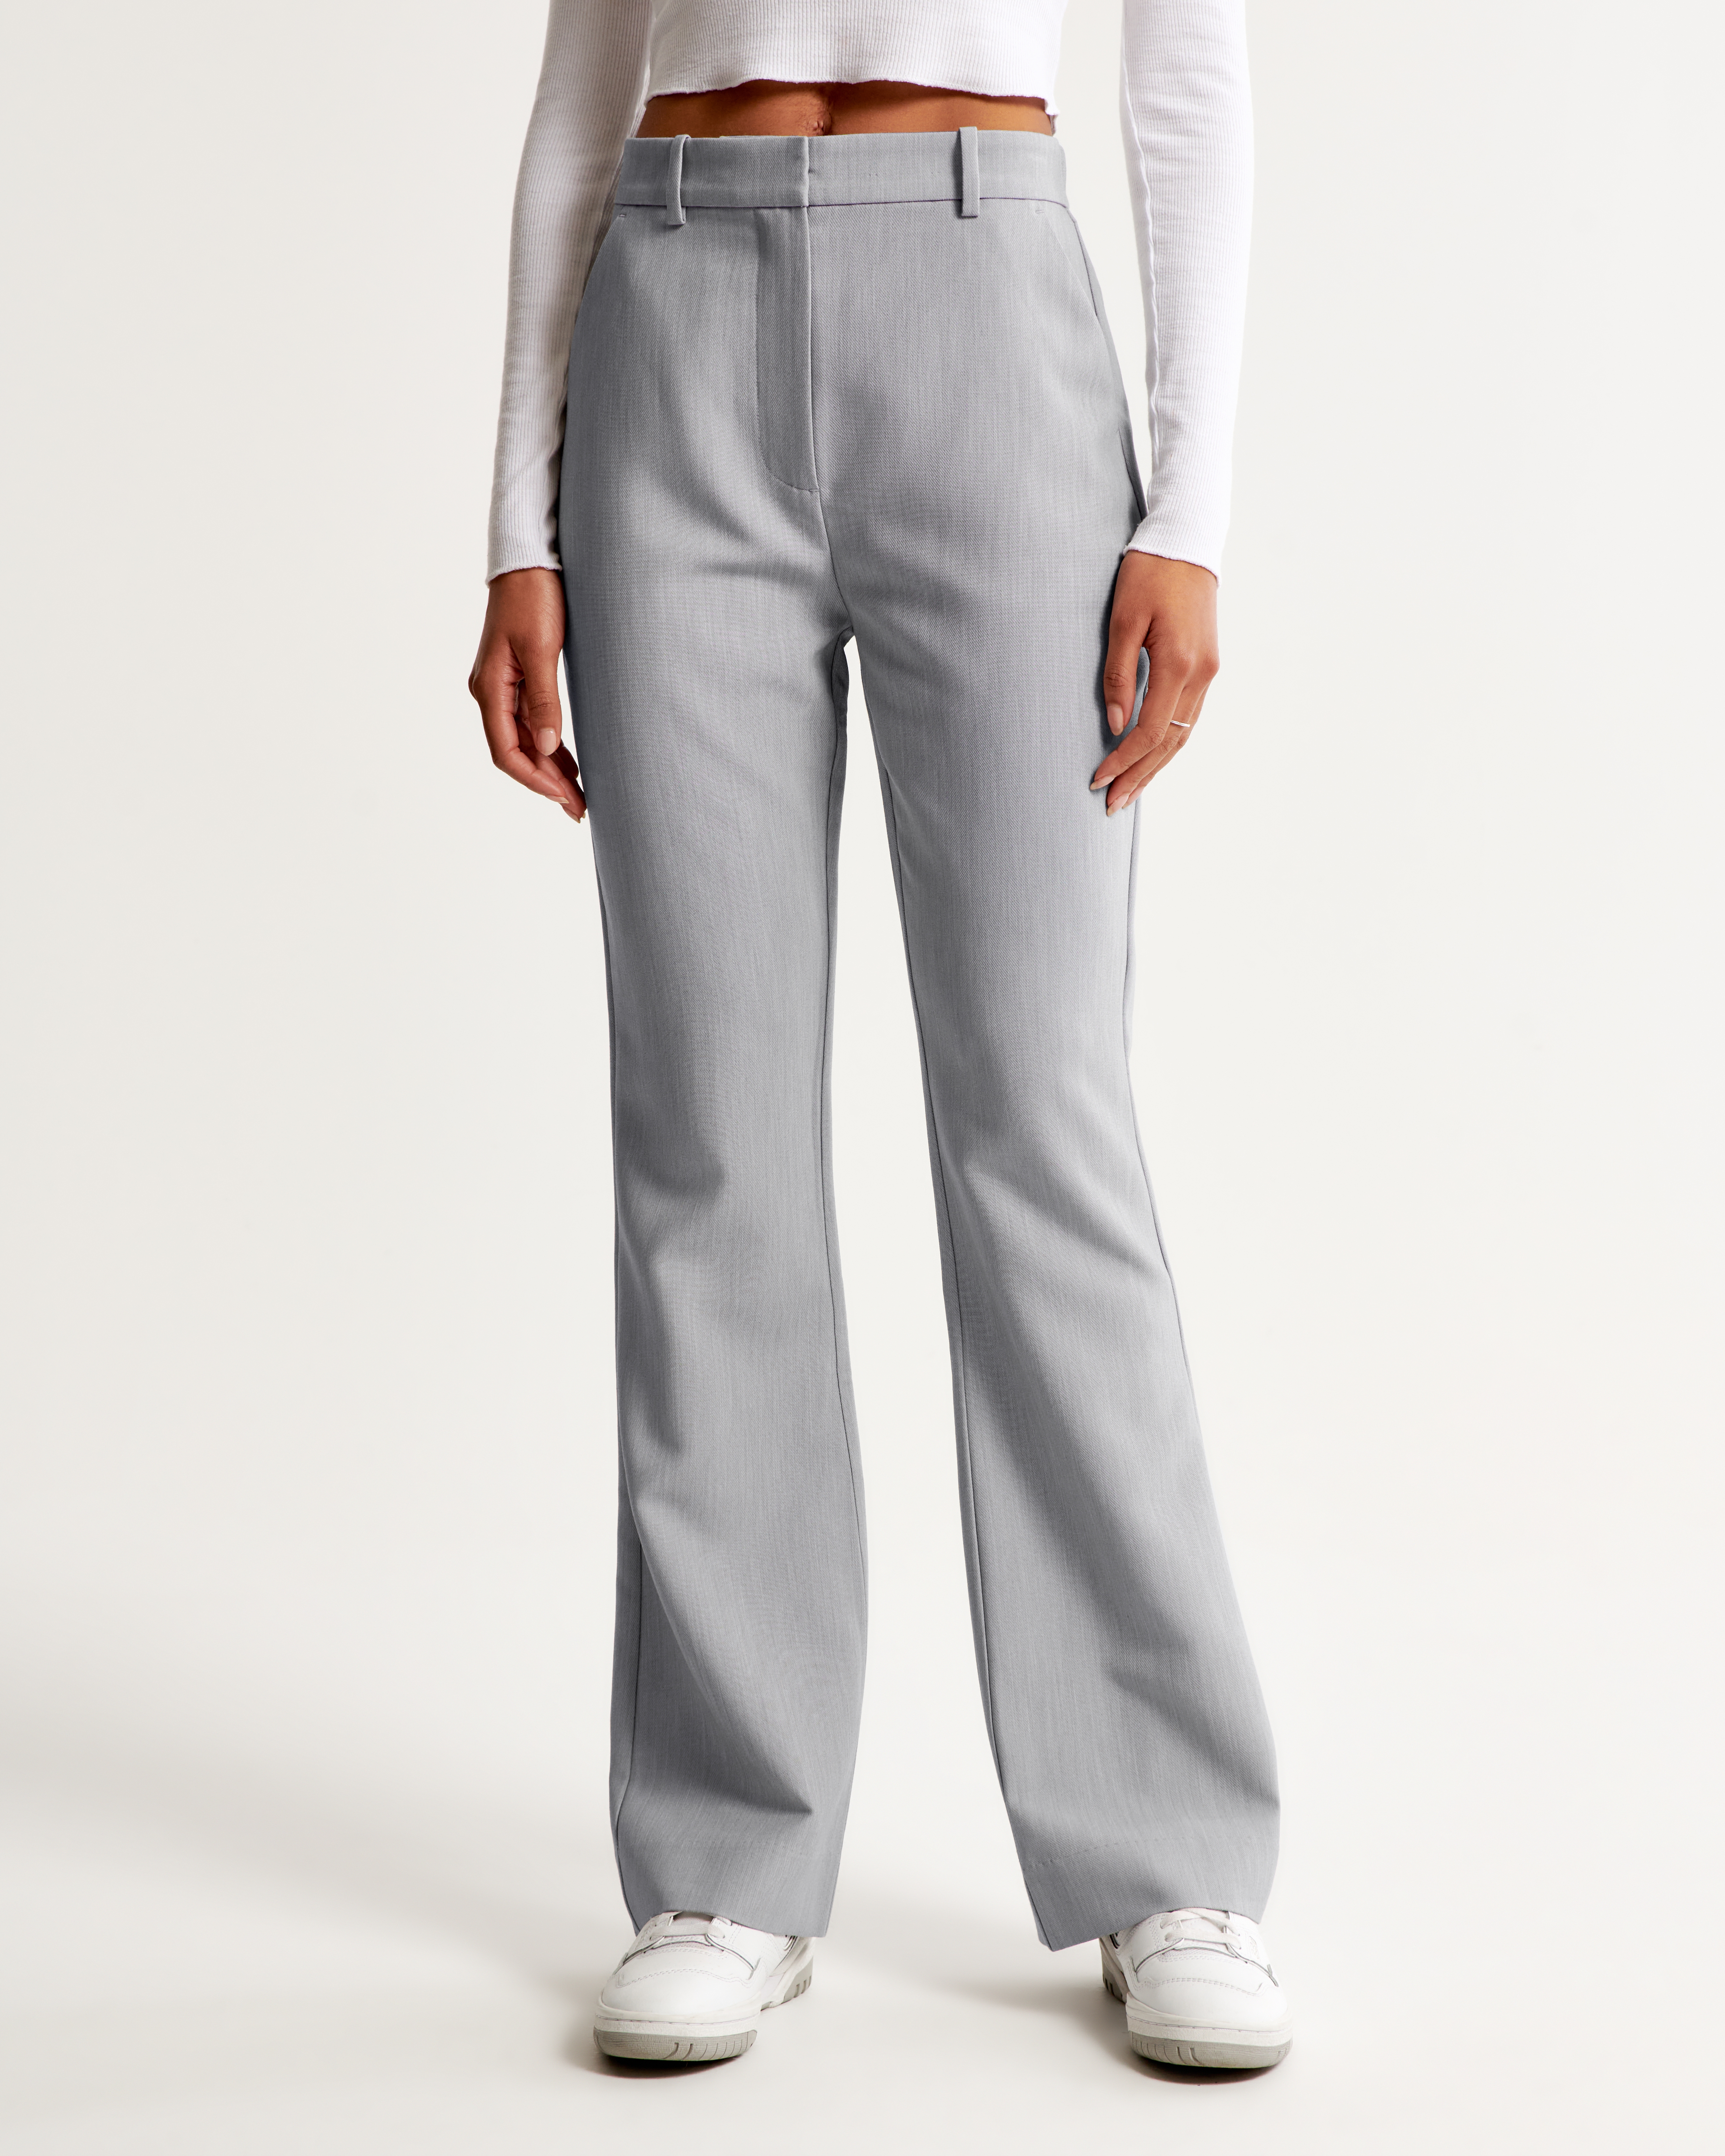 Women's Tailored Flare Pant | Women's Clearance | Abercrombie.com